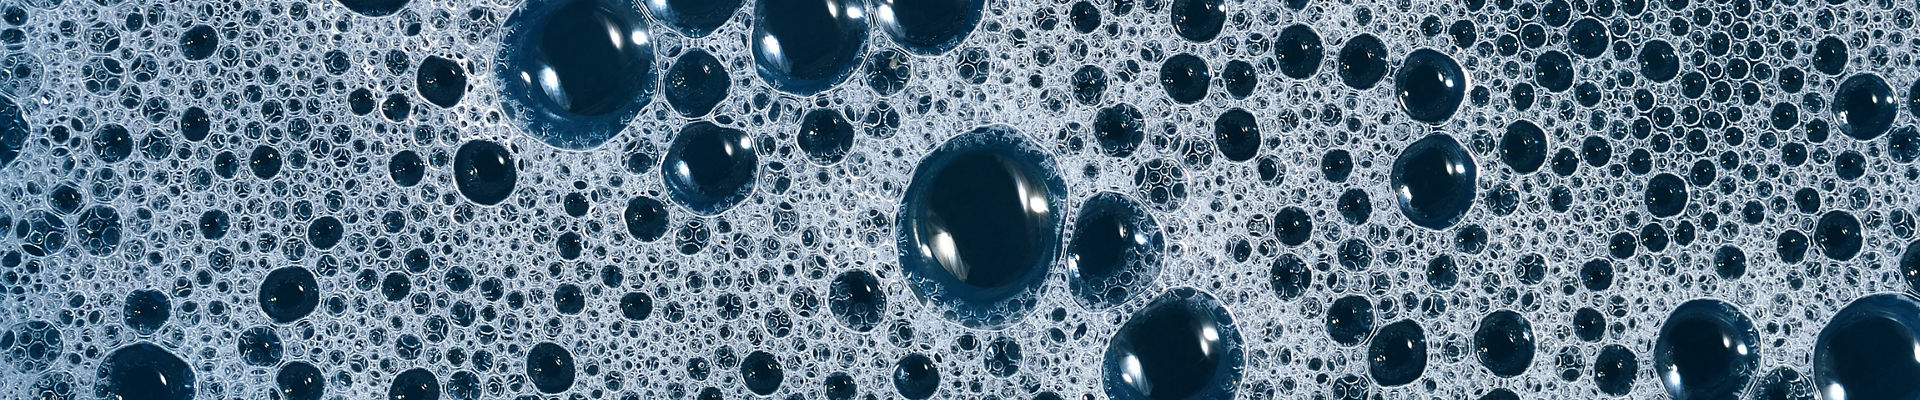 Soapsuds bubbles as background texture